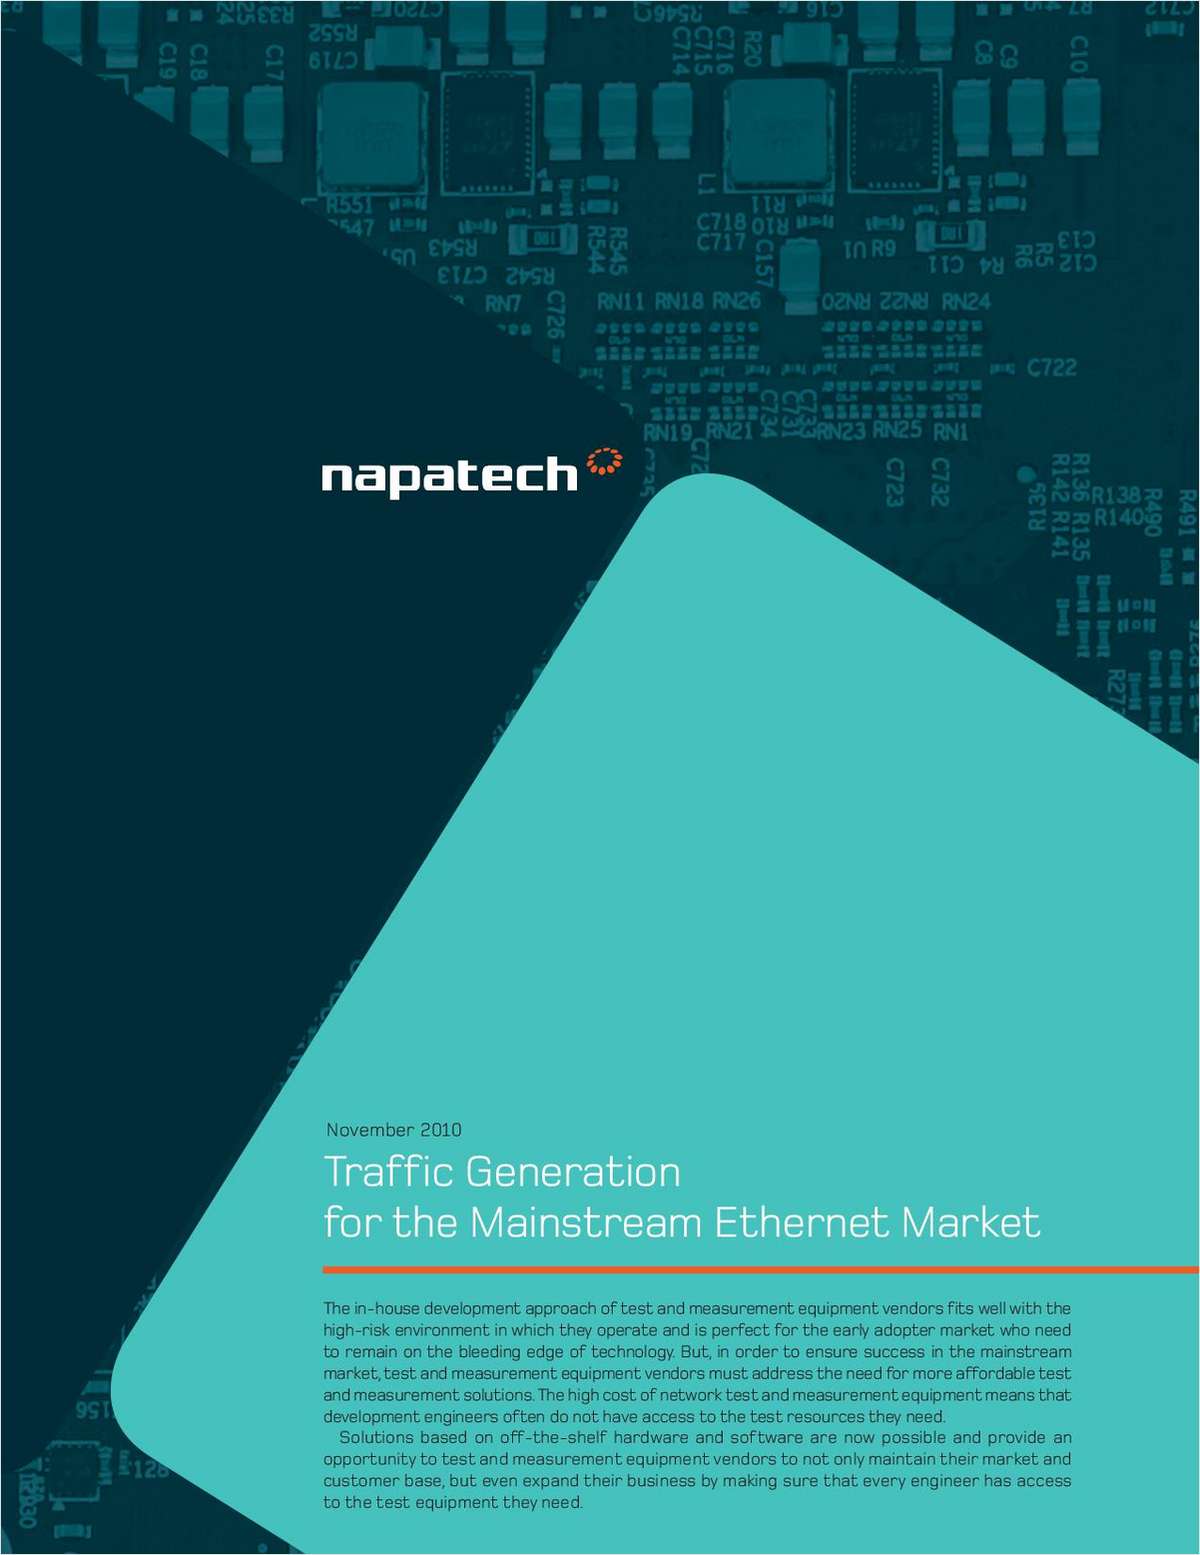 Traffic Generation for the Mainstream Ethernet Market for Test and Measurement Equipment Vendors